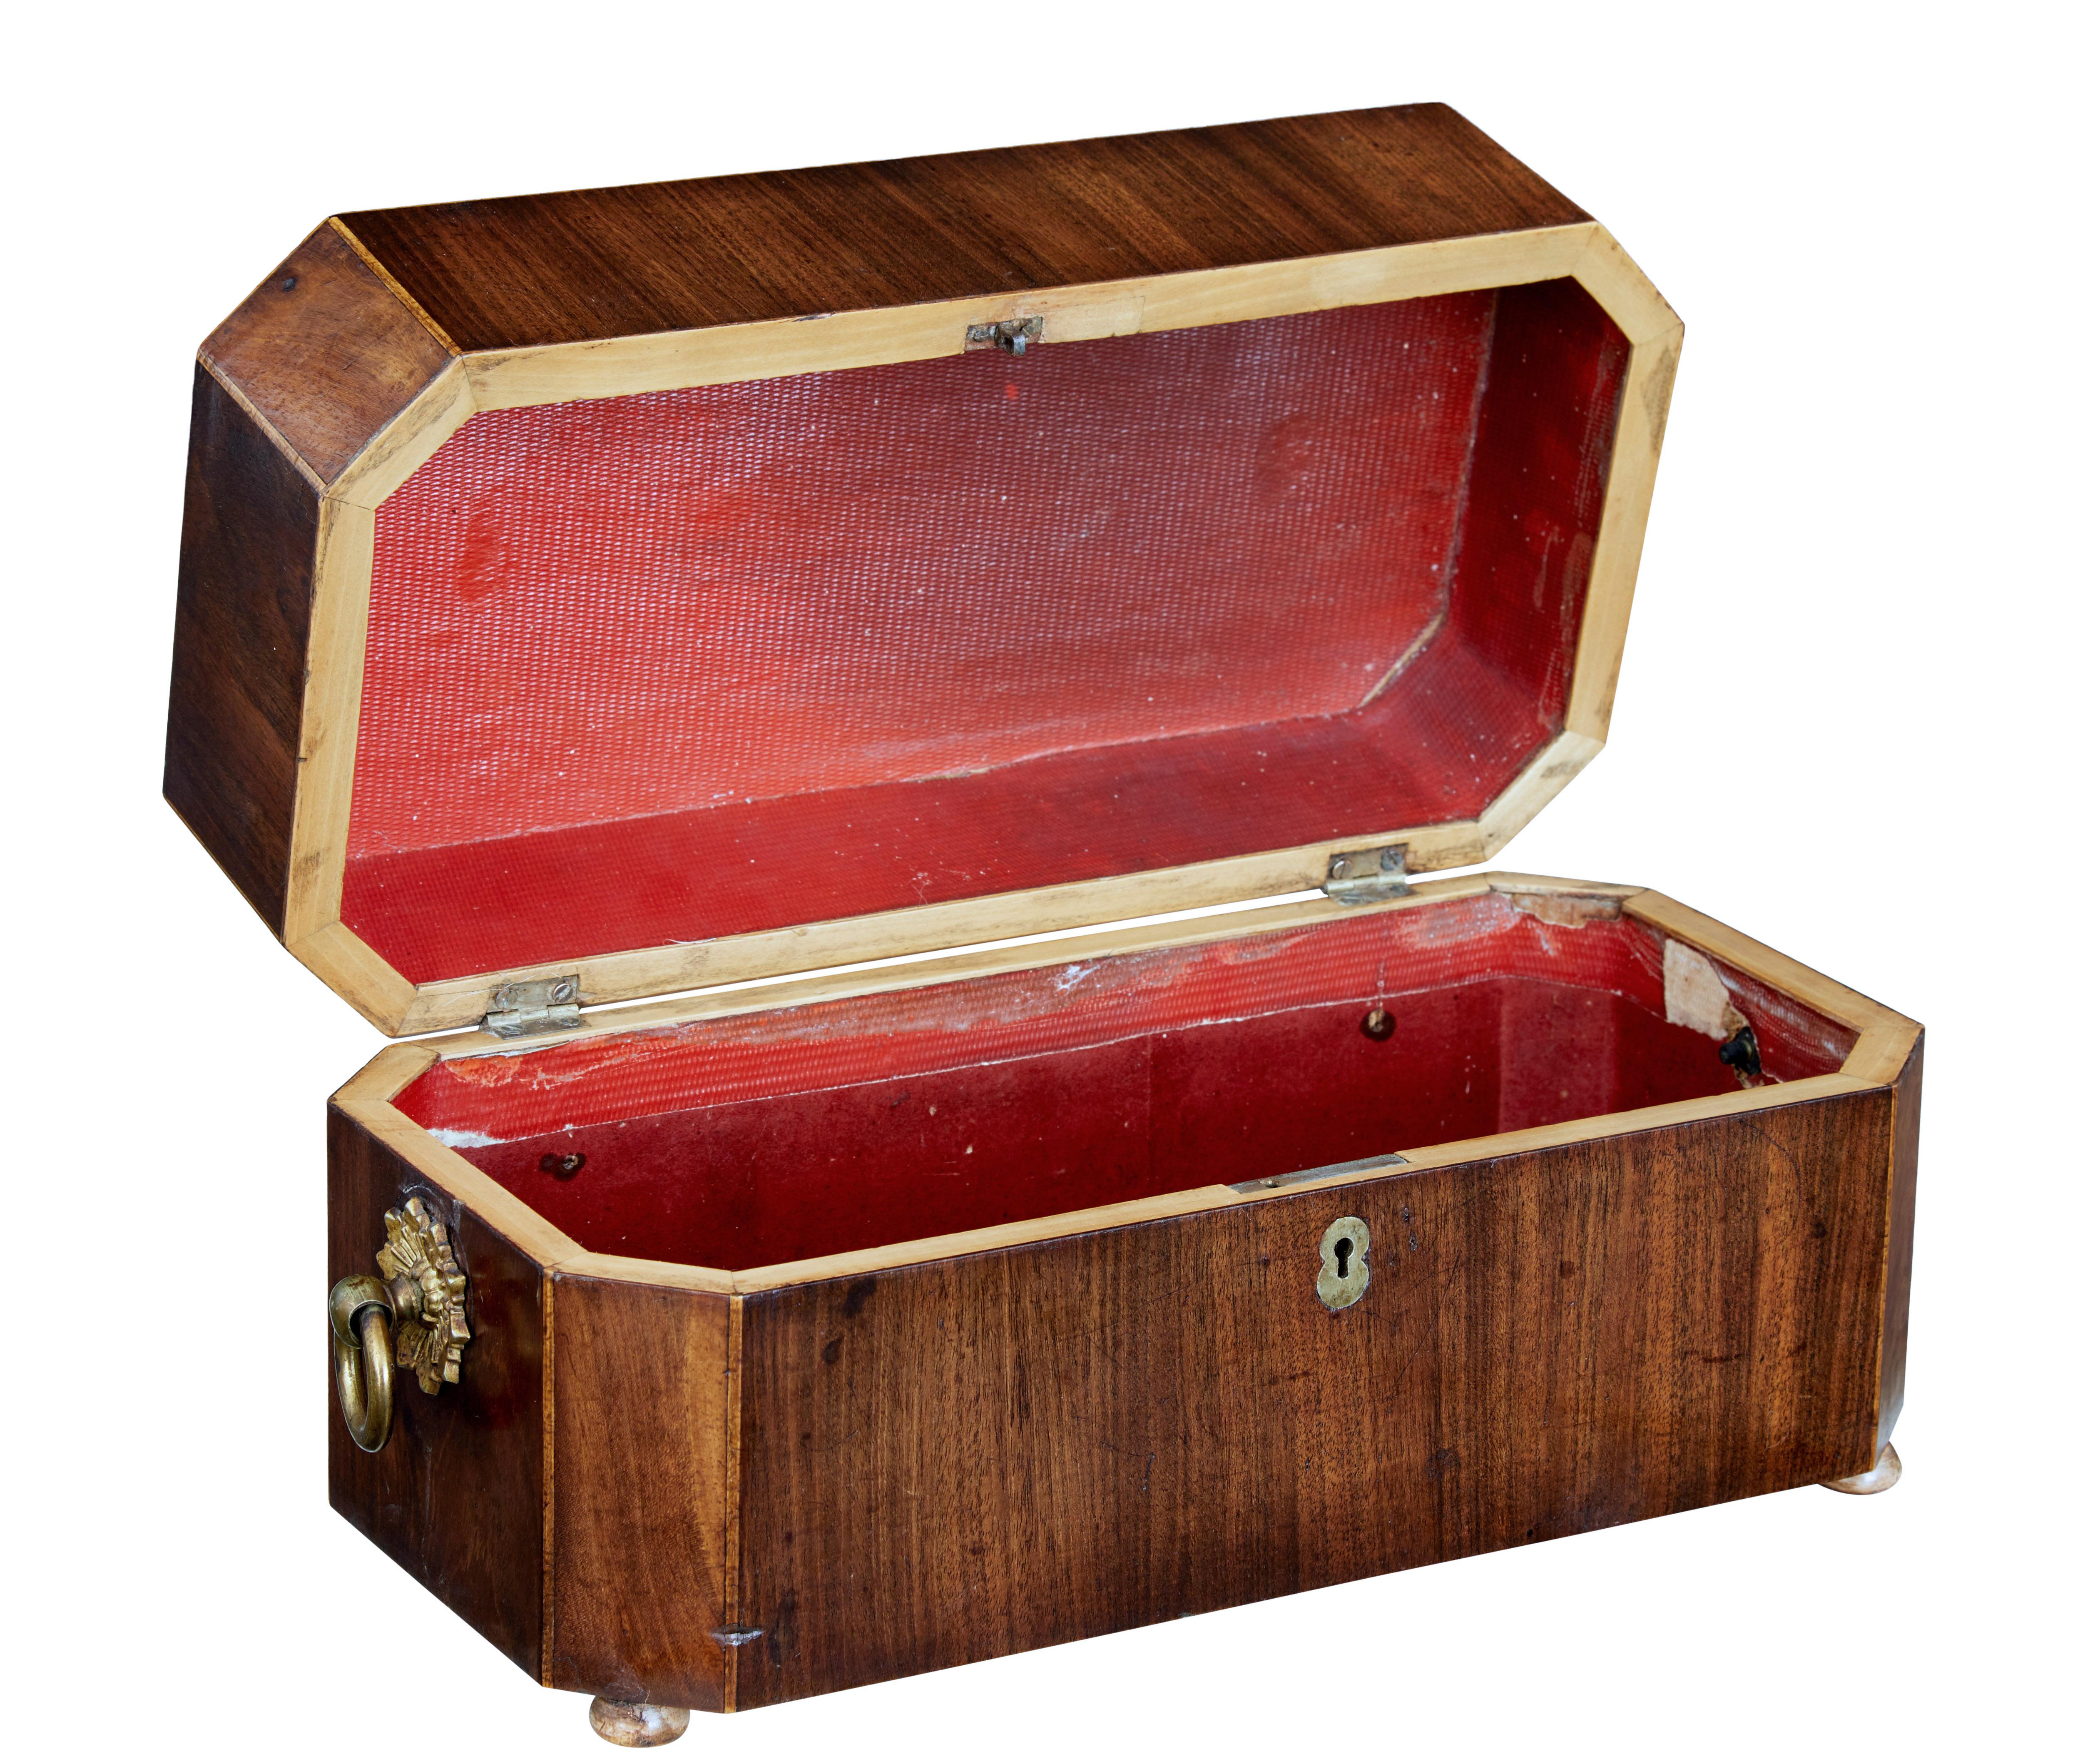 Good quality regency tea caddy, circa 1820.

Made using flame mahogany veneers. Brass handles with star motif to the sides. Canted corners strung with satinwood. Standing on flat bun feet.

Paper lined interior with no compartments or bowls.